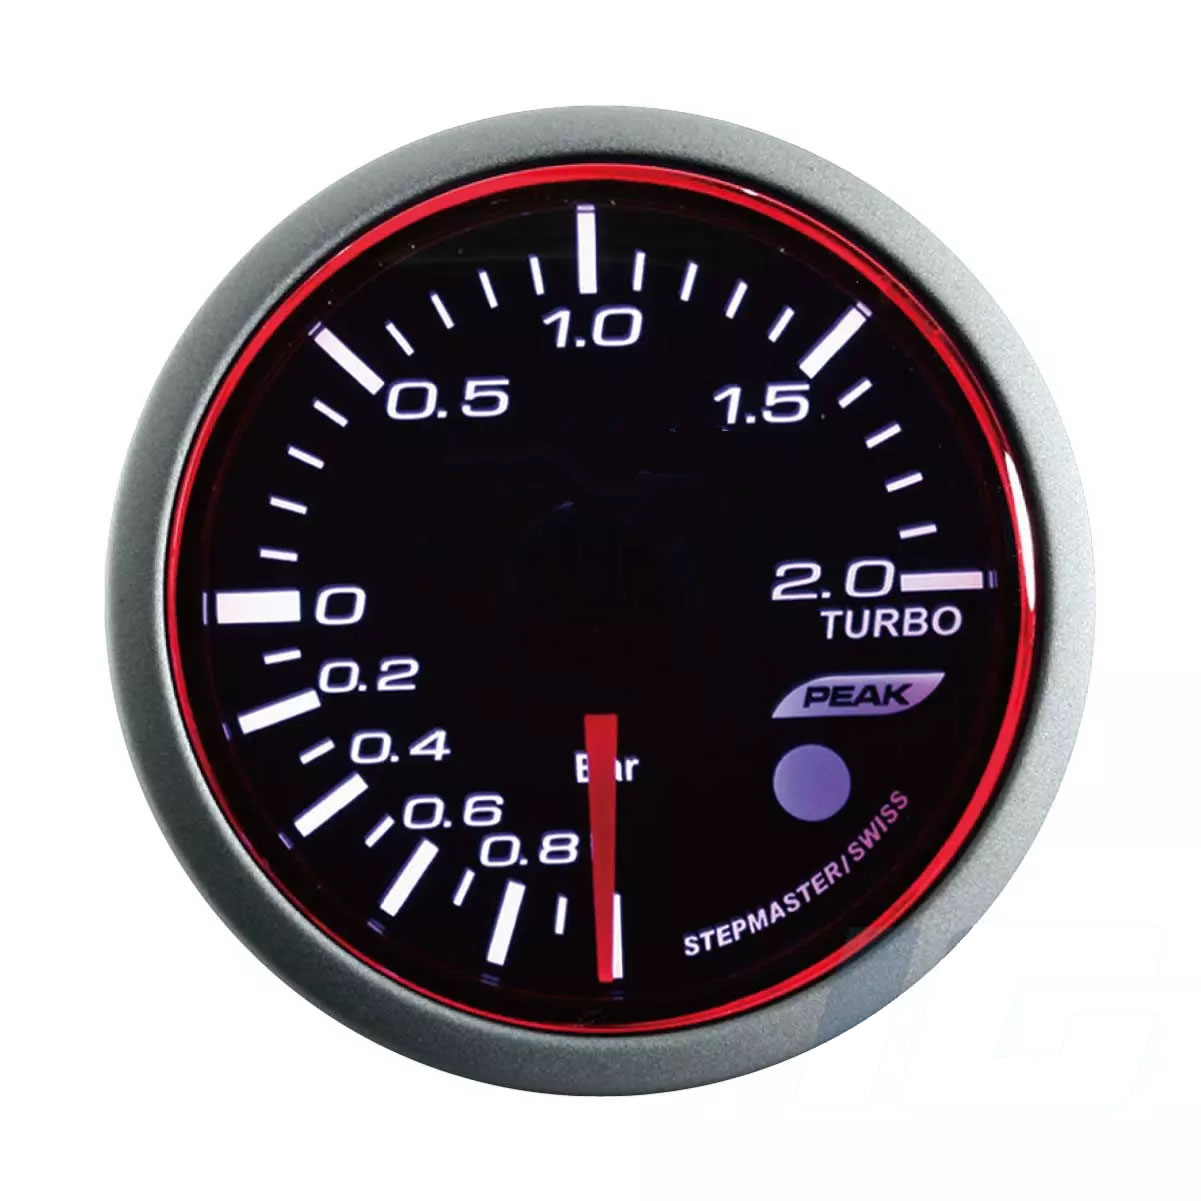 52mm White and Blue and Amber LED Performance Car Gauges - Boost Gauge With Sensor and Warning and Peak For Your Sport Racing Car